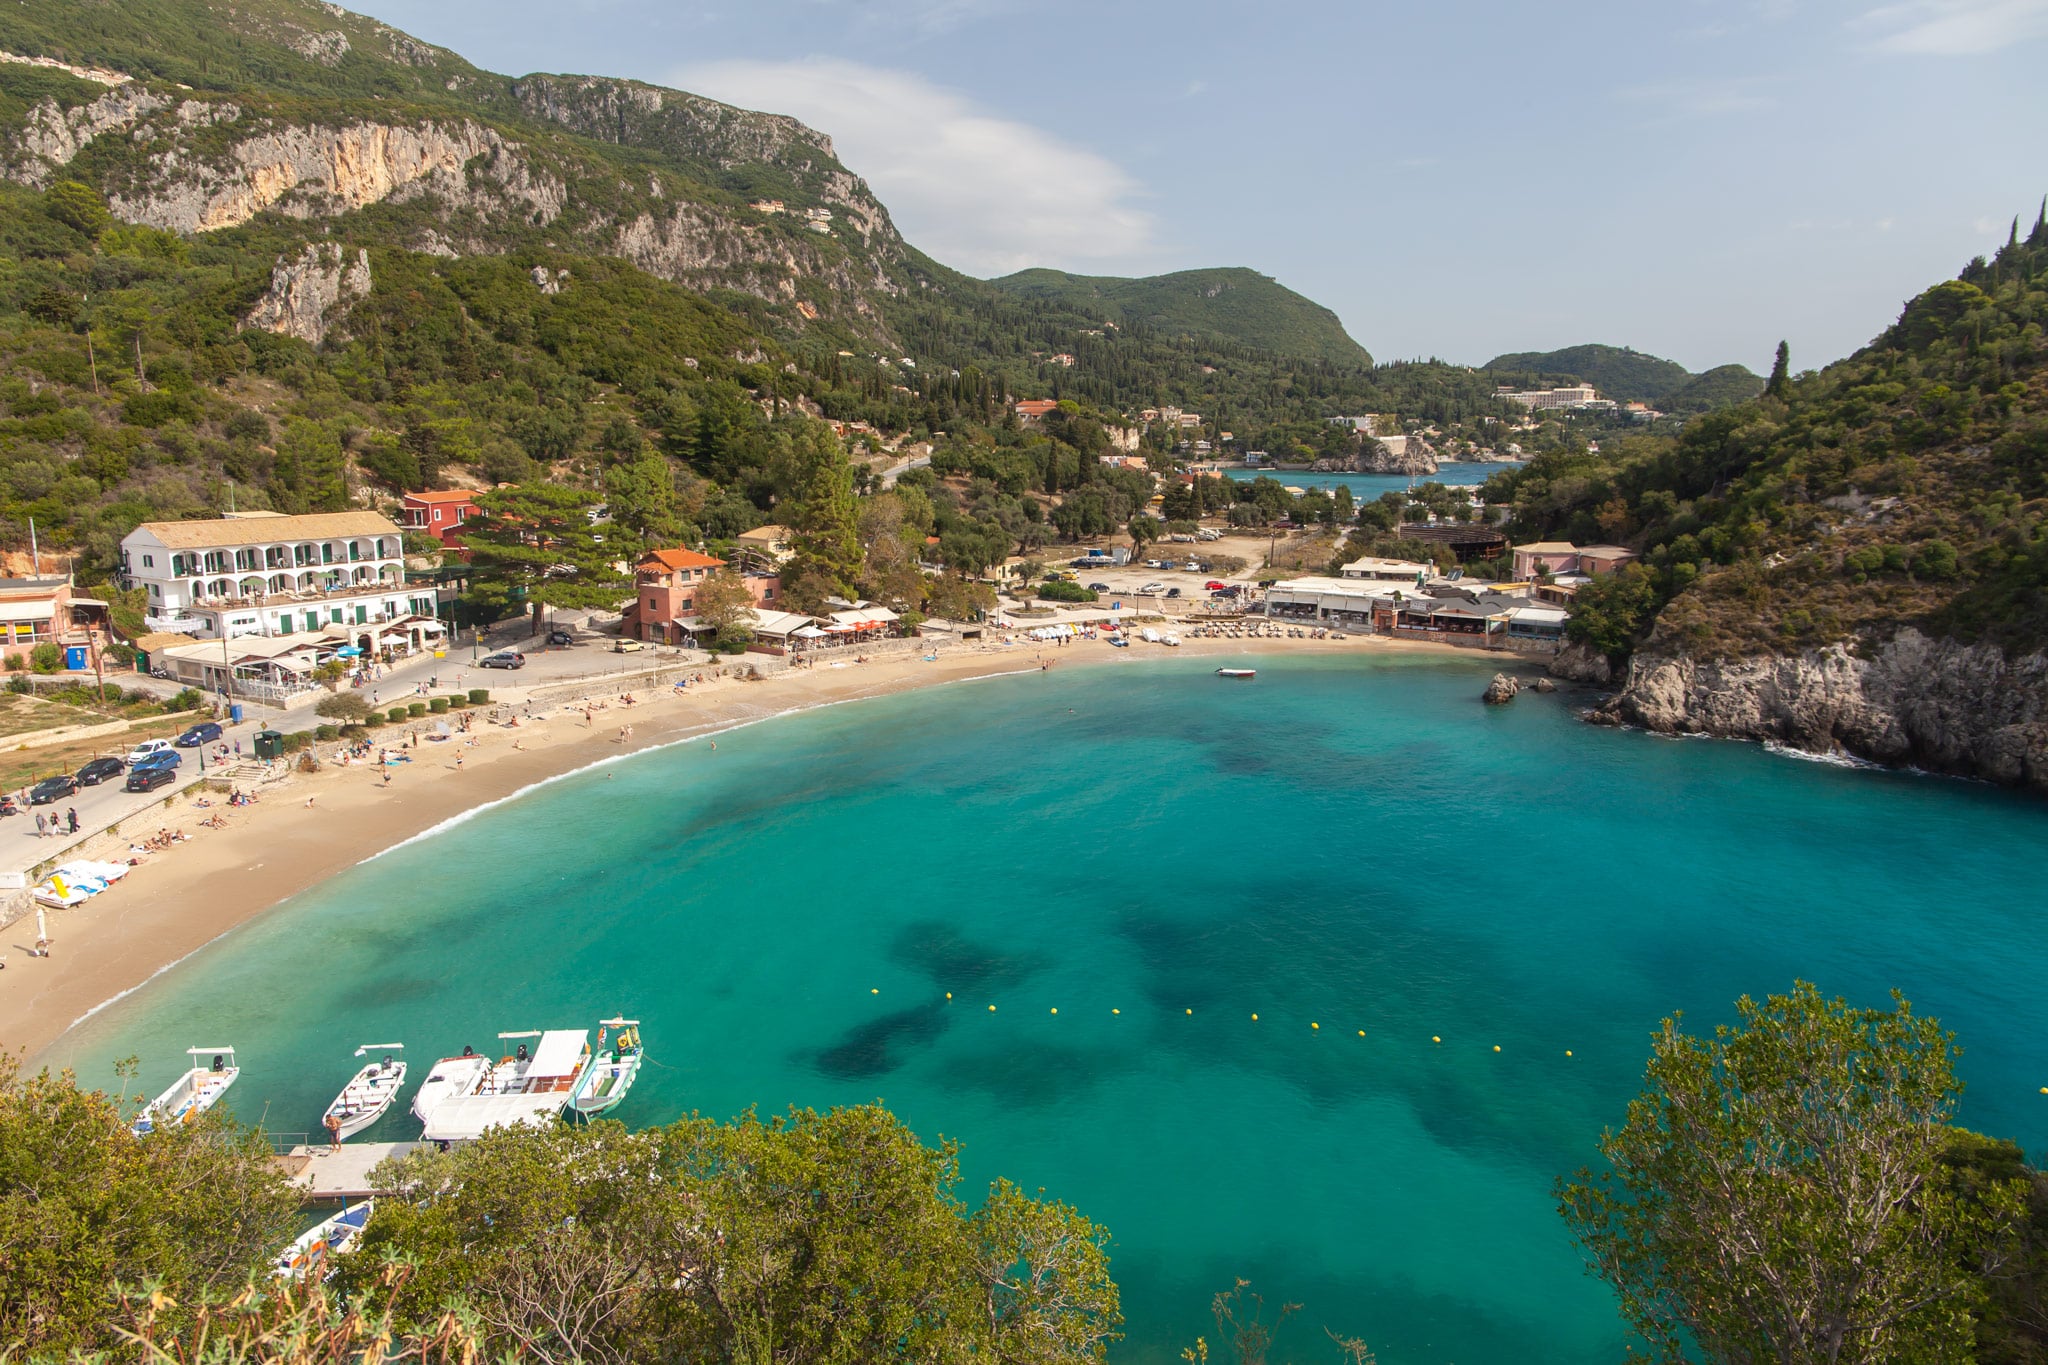 Corfu's beaches are always a great Greece holiday destination